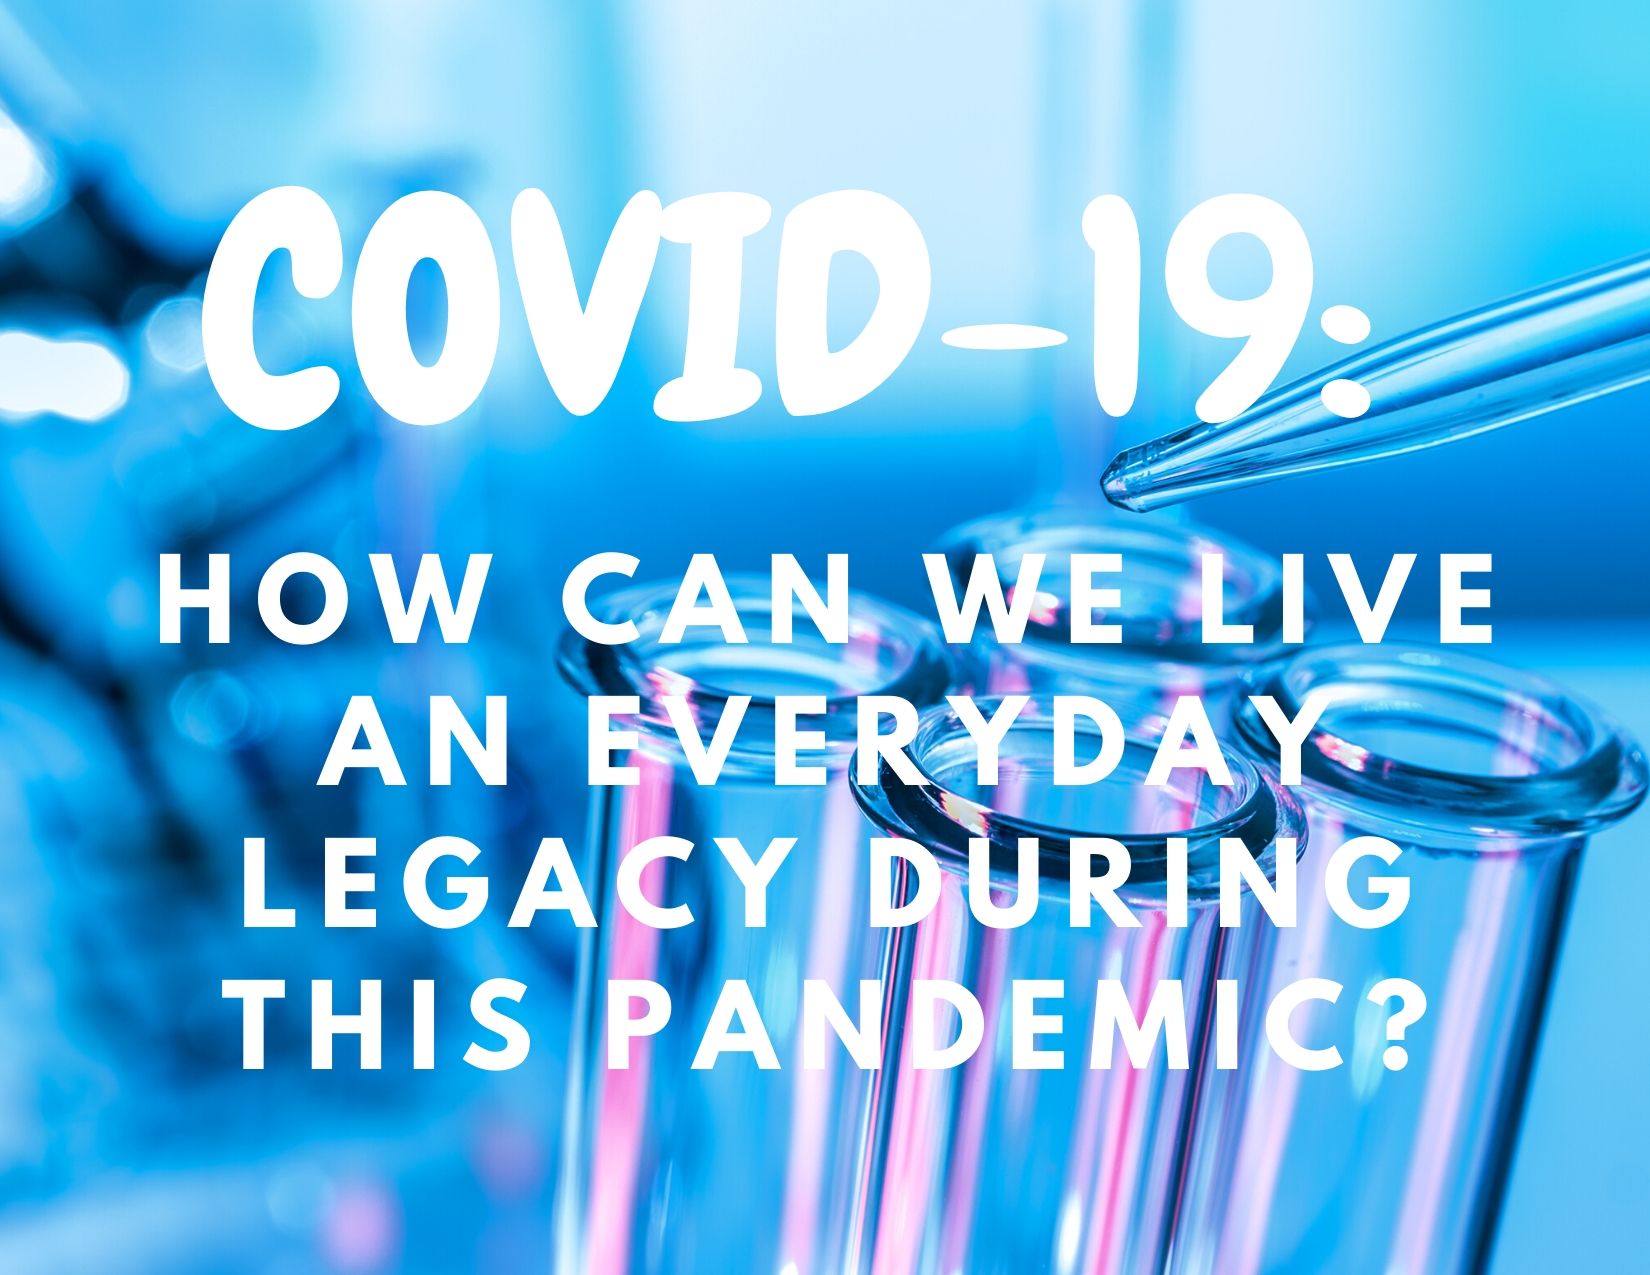 COVID-19 How can we live an everyday legacy during this pandemic?